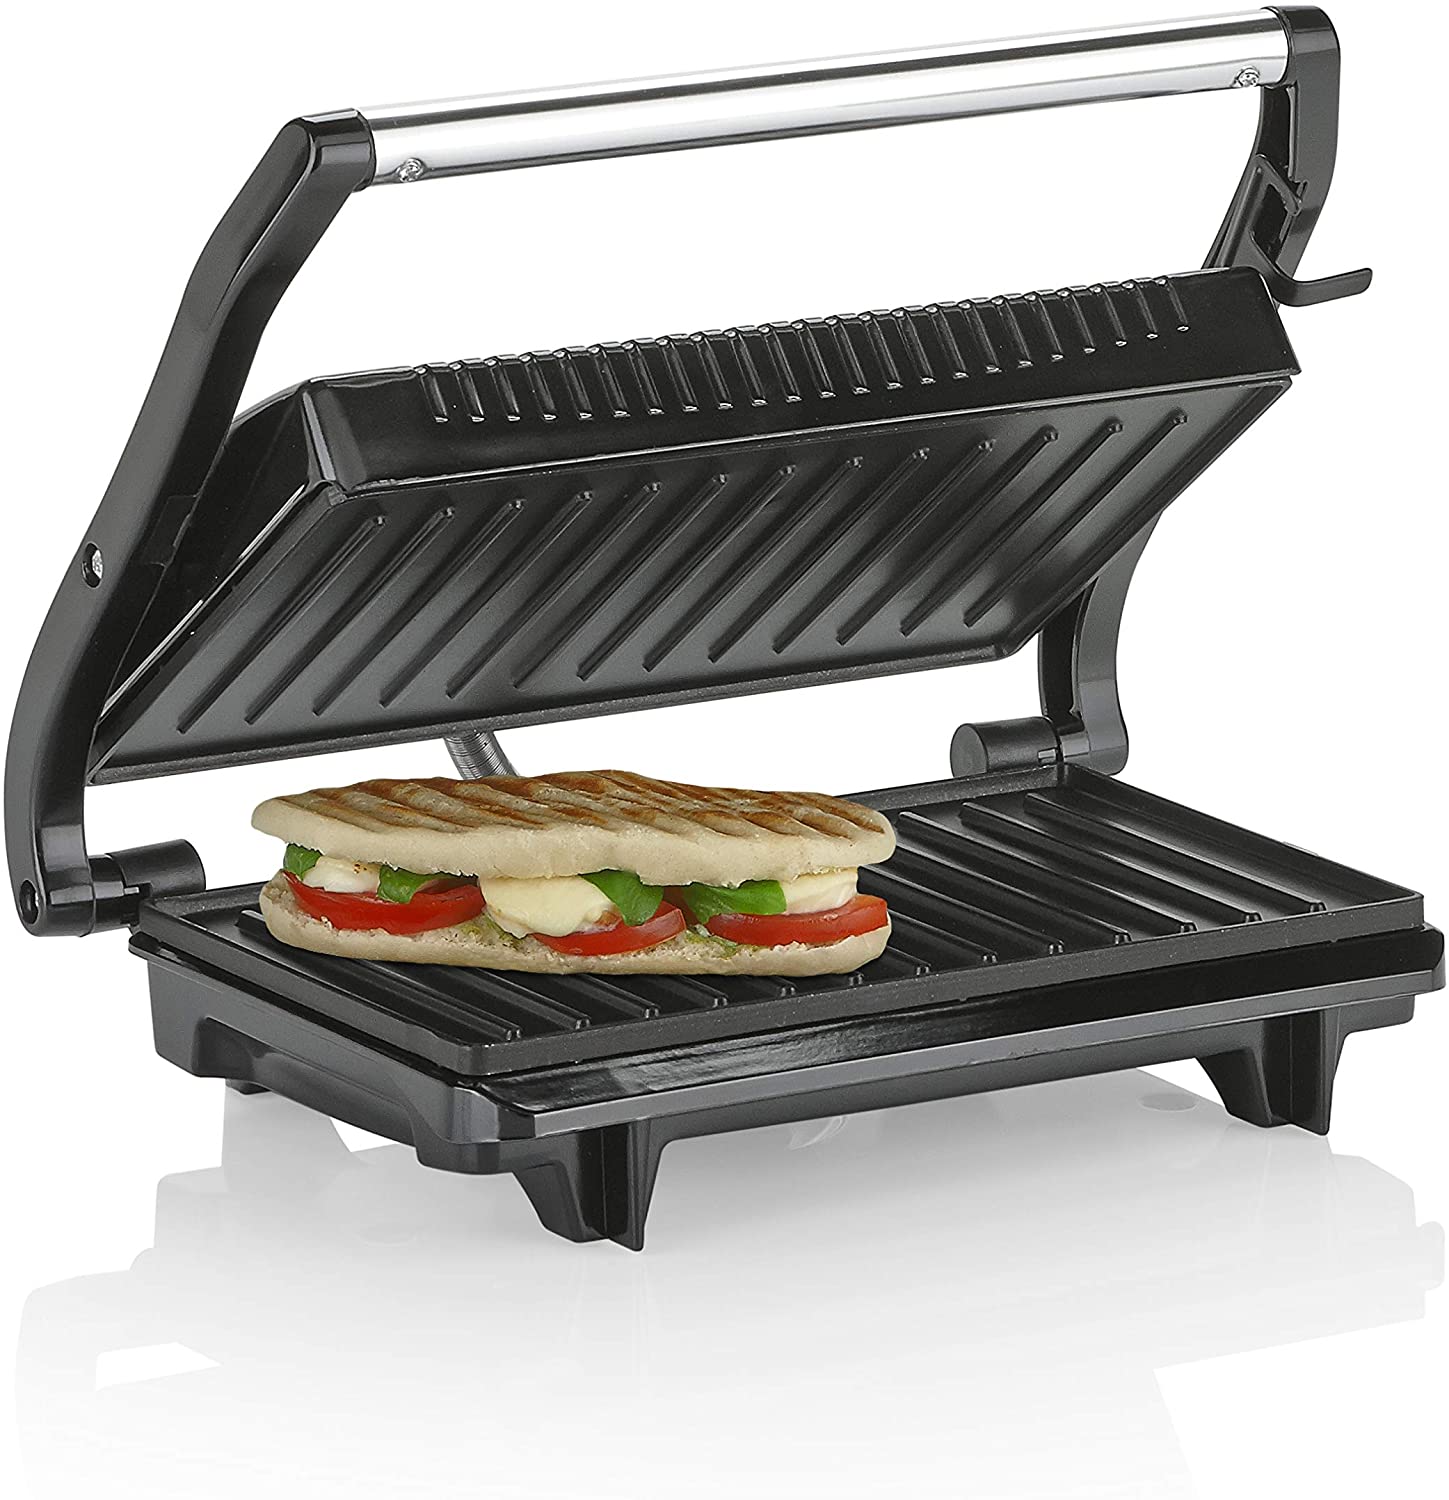 Tristar Contact Grill GR-2846, Sandwich Maker with Stainless Steel Design, 